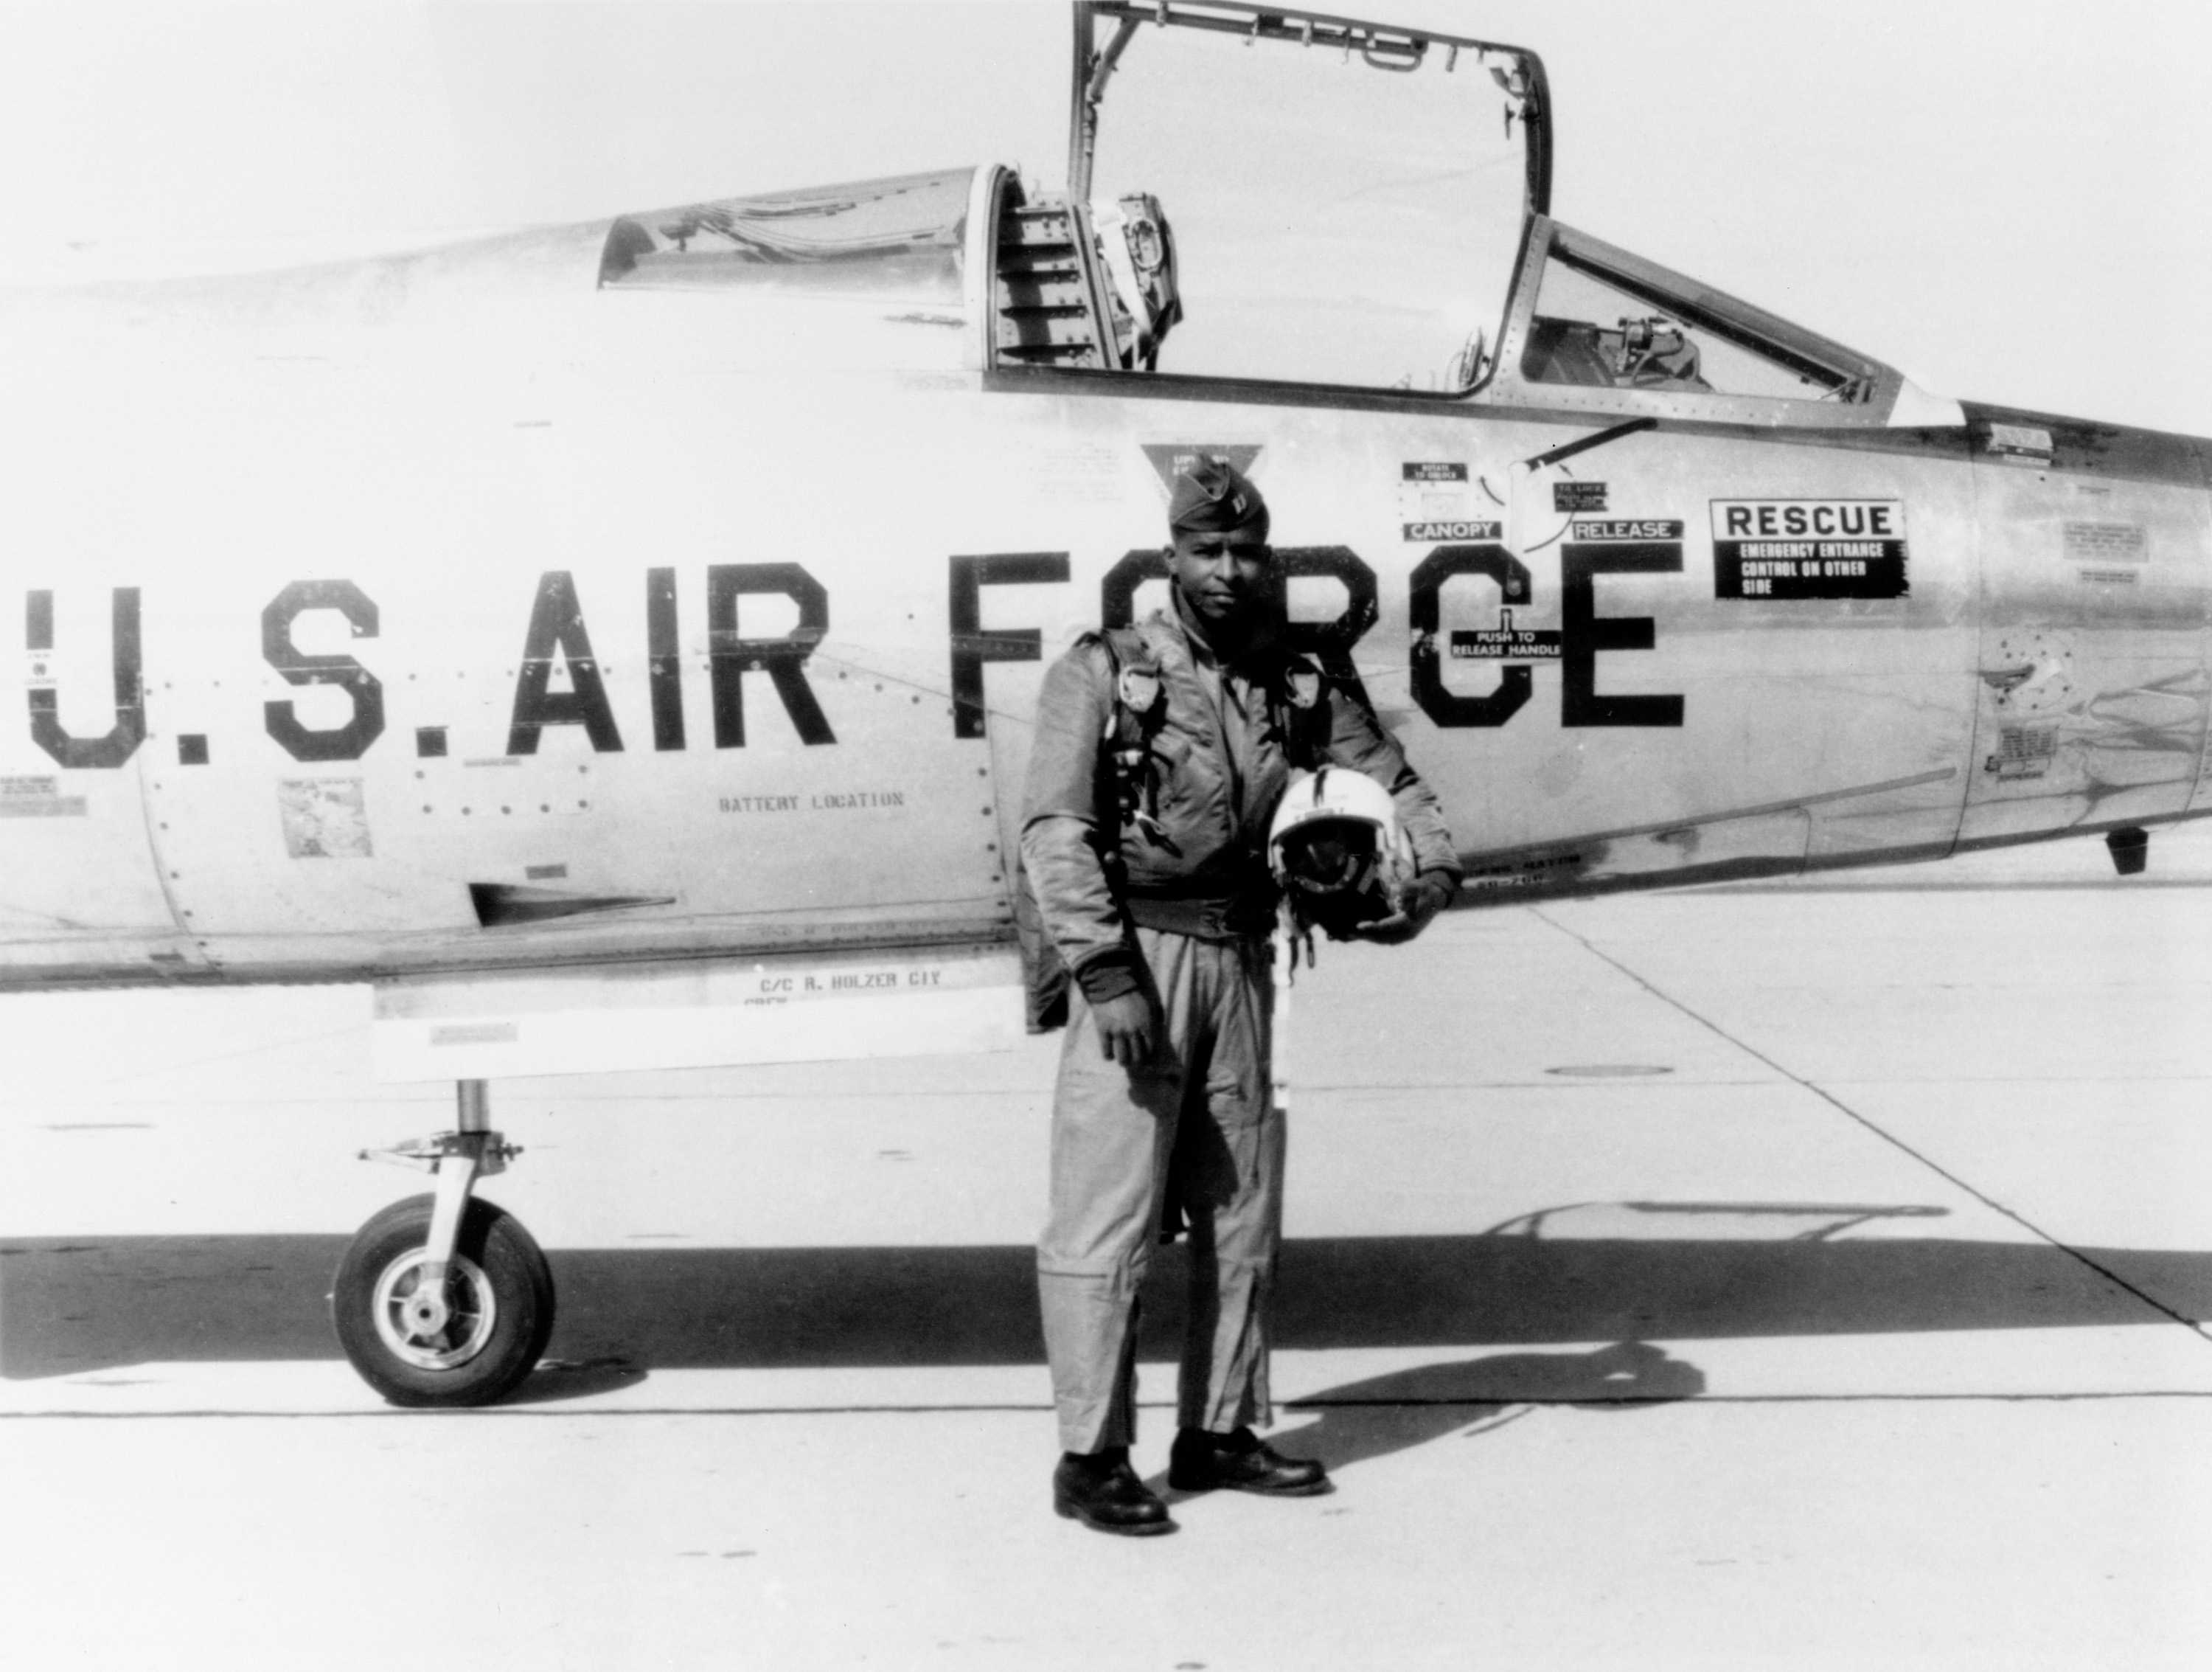 Lawrene poses for a black and white photo in front of a U.S Air Force plane. He is dressed in his flying suit.